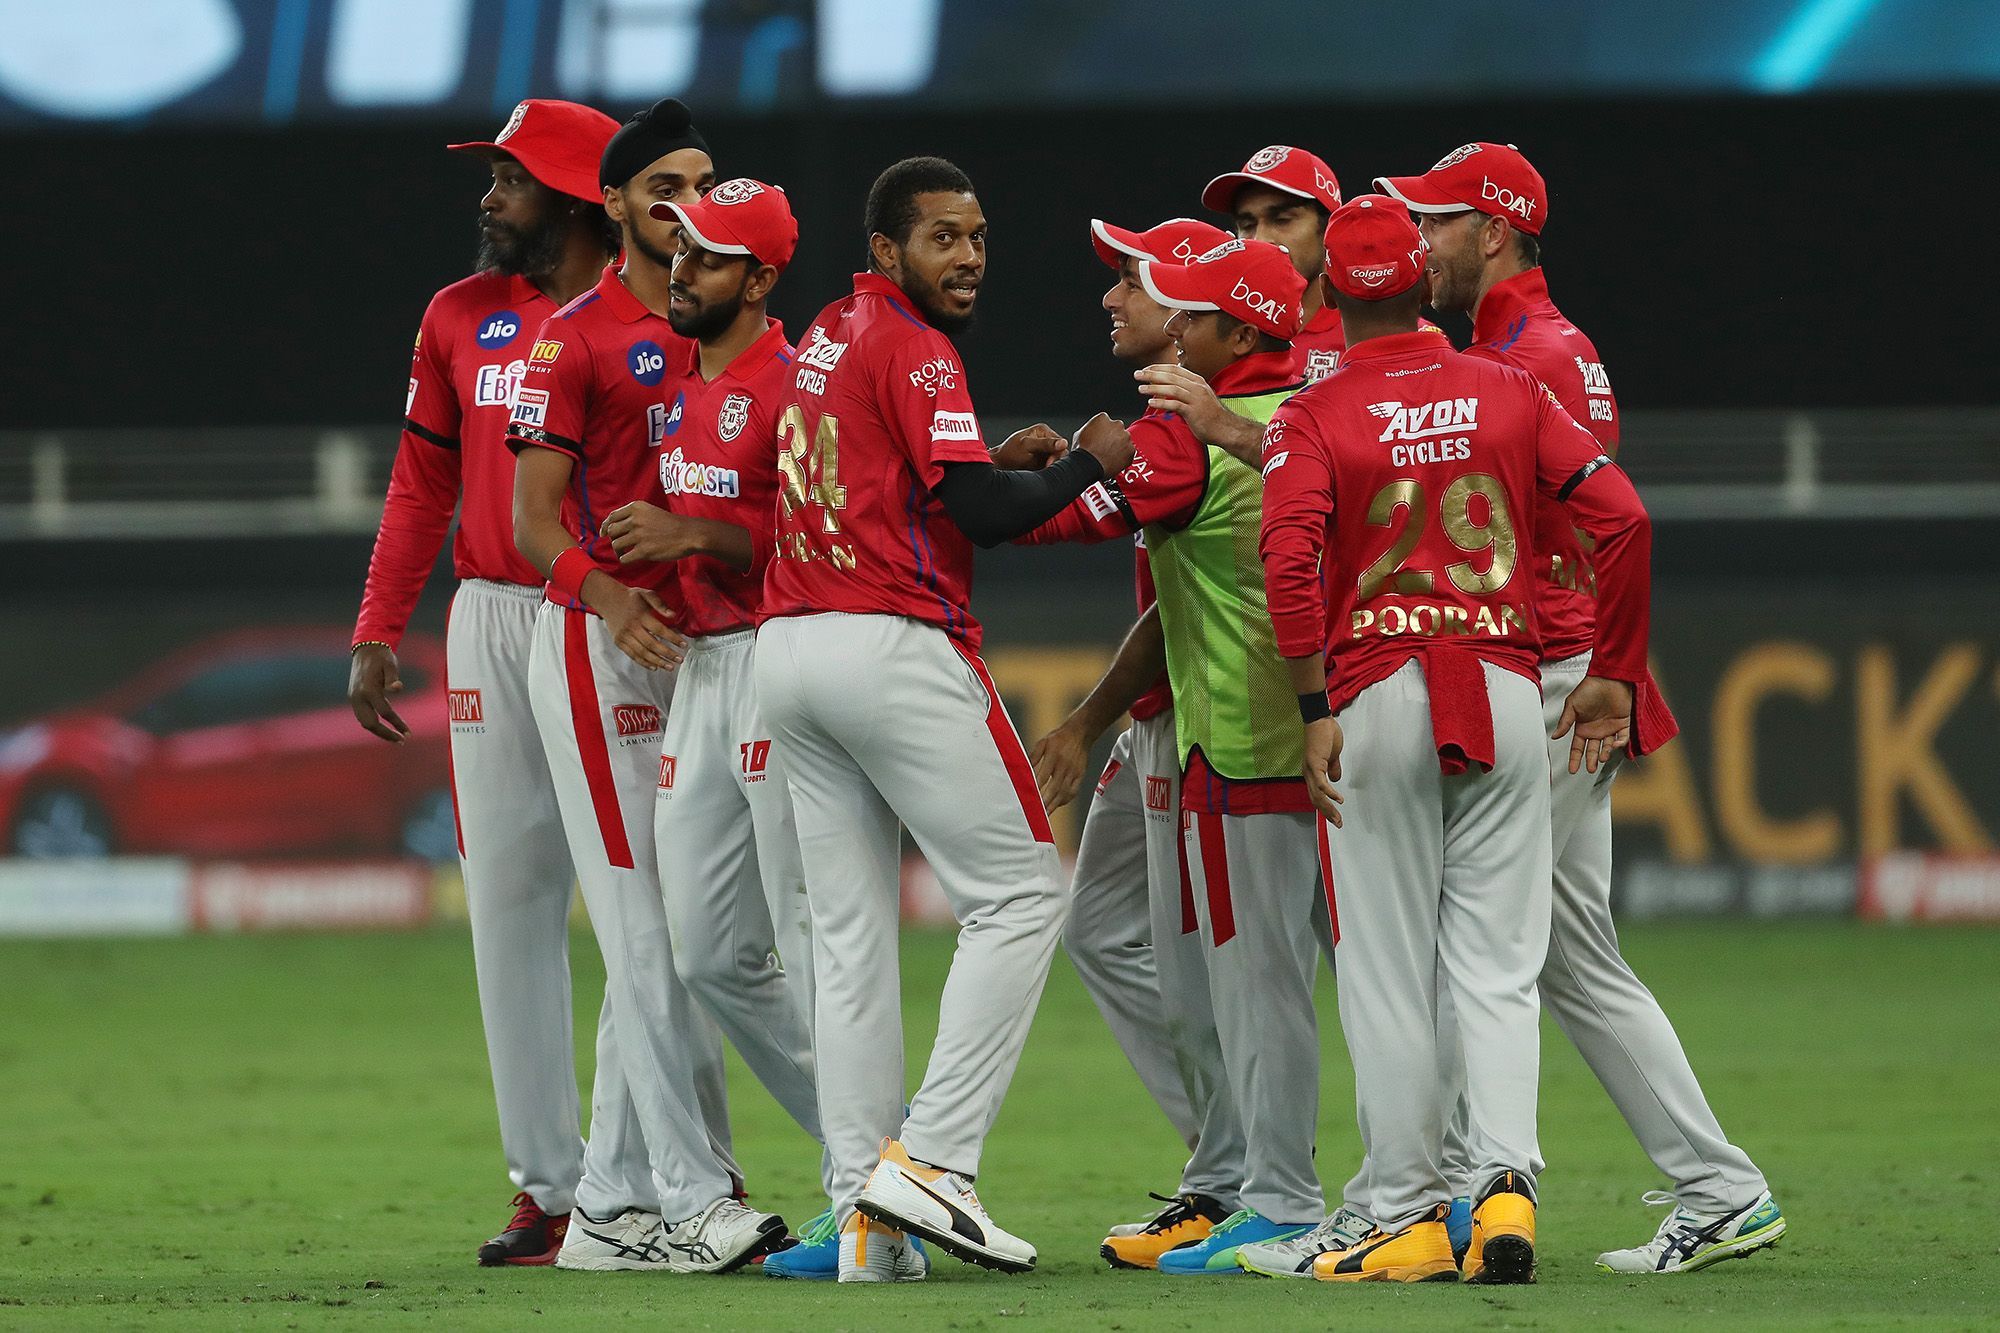 IPL 2020 Review | KXIP: A promising campaign with an unfulfilling, anti-climactic end